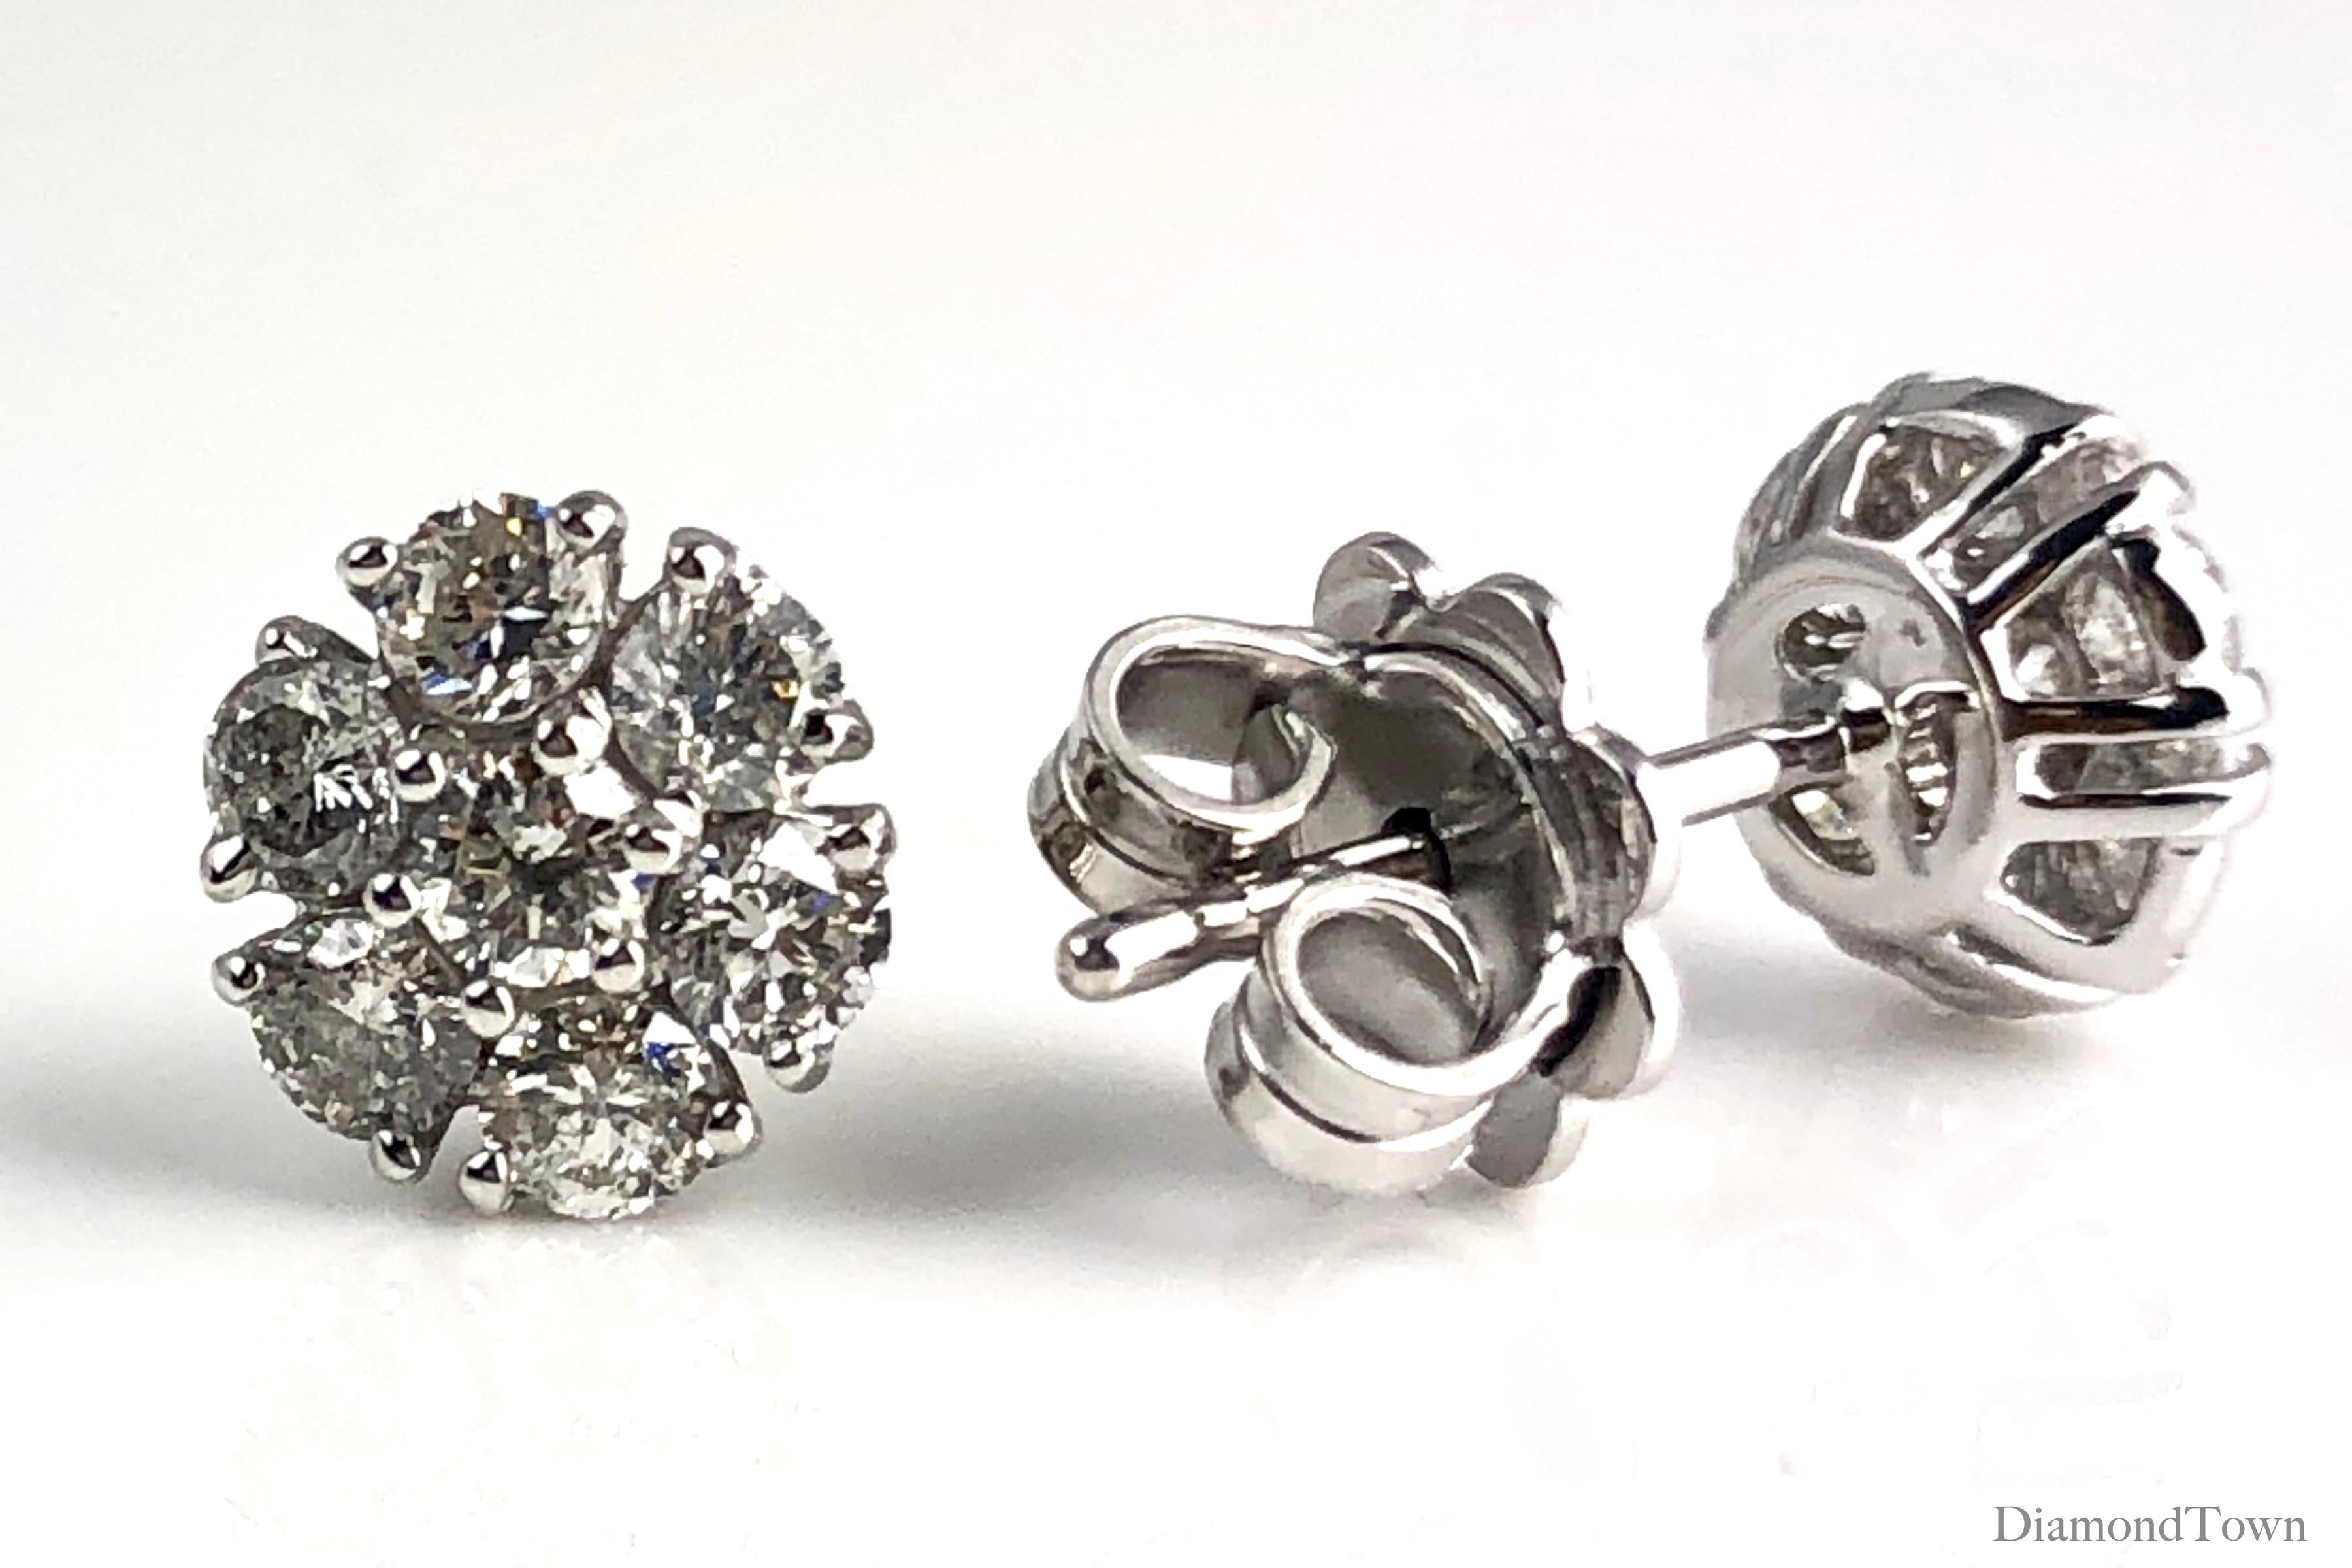 These stud earrings feature 14 round white diamonds (seven diamonds per earring) arranged in a cluster flower shape. A suitable bridal accompaniment, or for the event of your choice.

Set in 14k White Gold.

Many of our items have matching companion